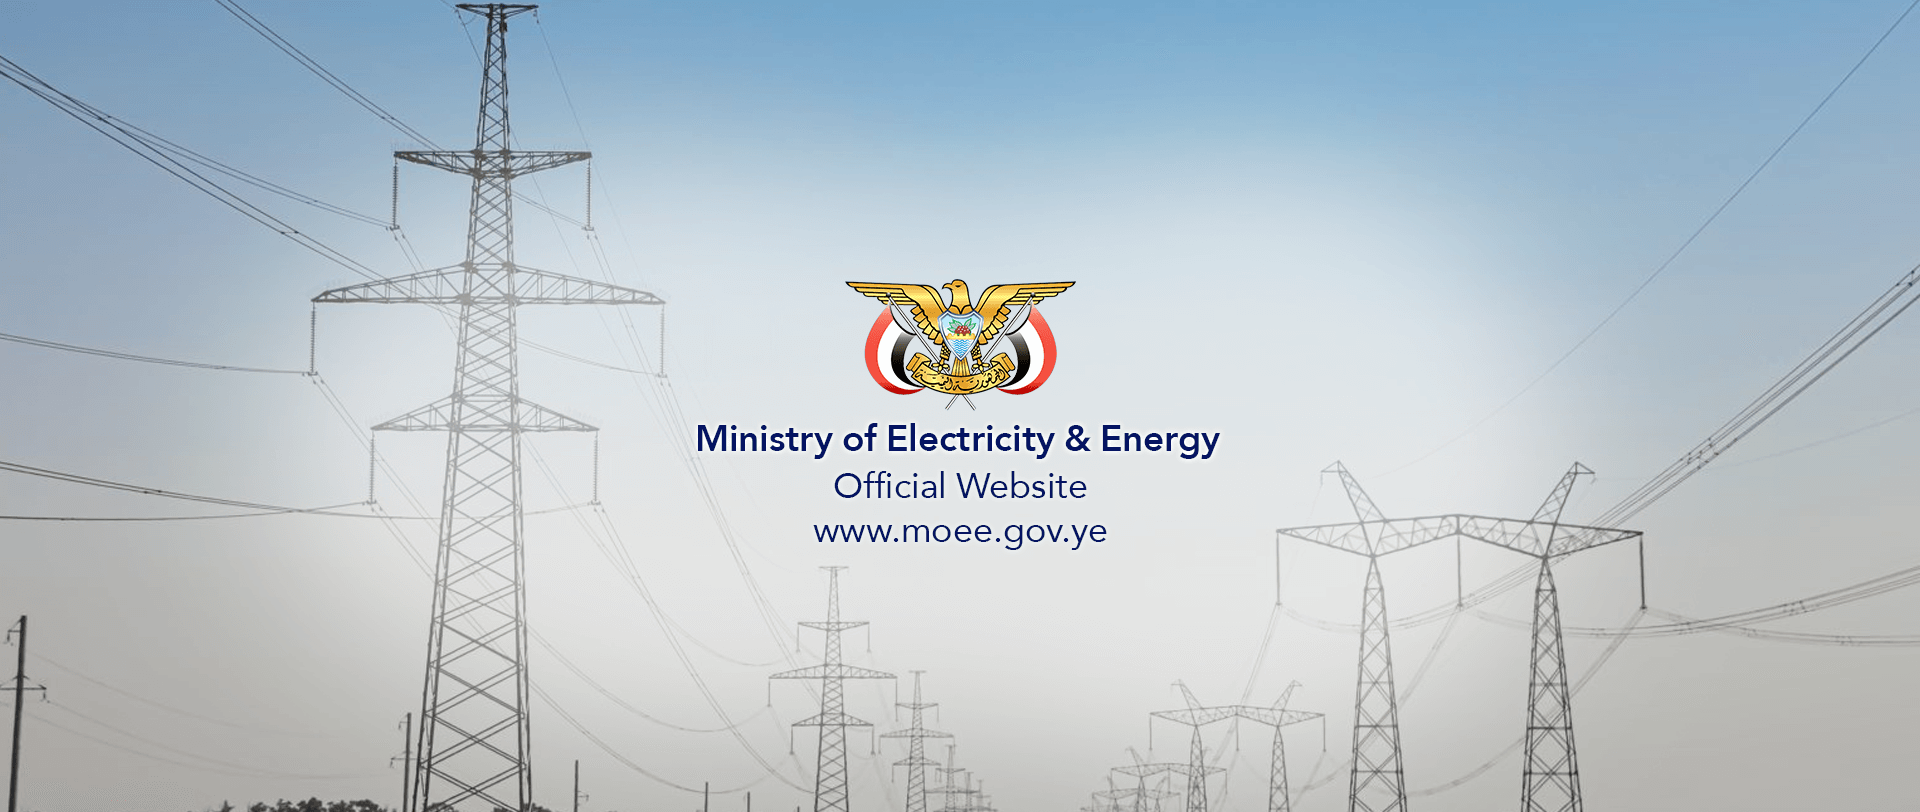 Ministry of Electricity & Energy